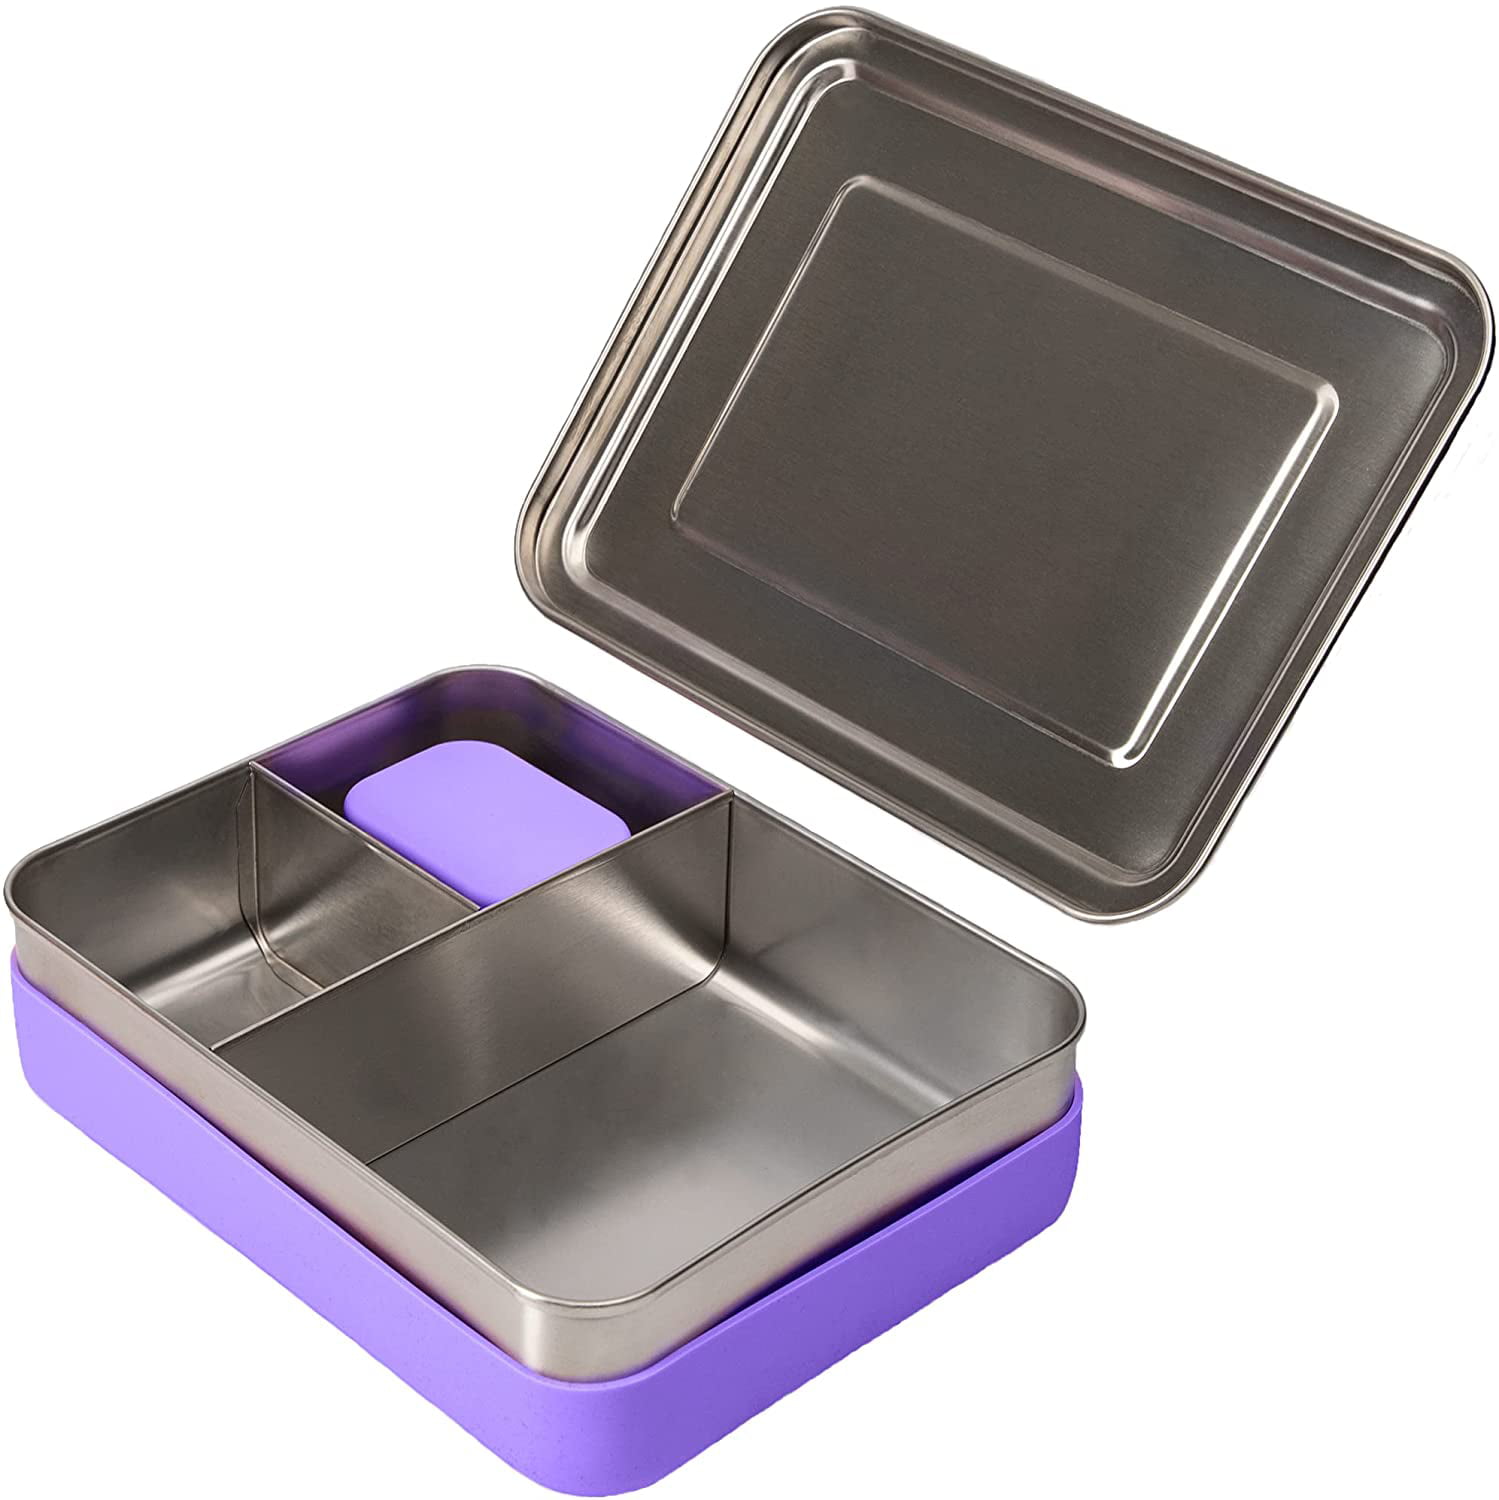 JSCARES Stainless Steel Bento Box Adult Lunch Box, 3 Stackable Bento Lunch  Containers, Portable Mode…See more JSCARES Stainless Steel Bento Box Adult